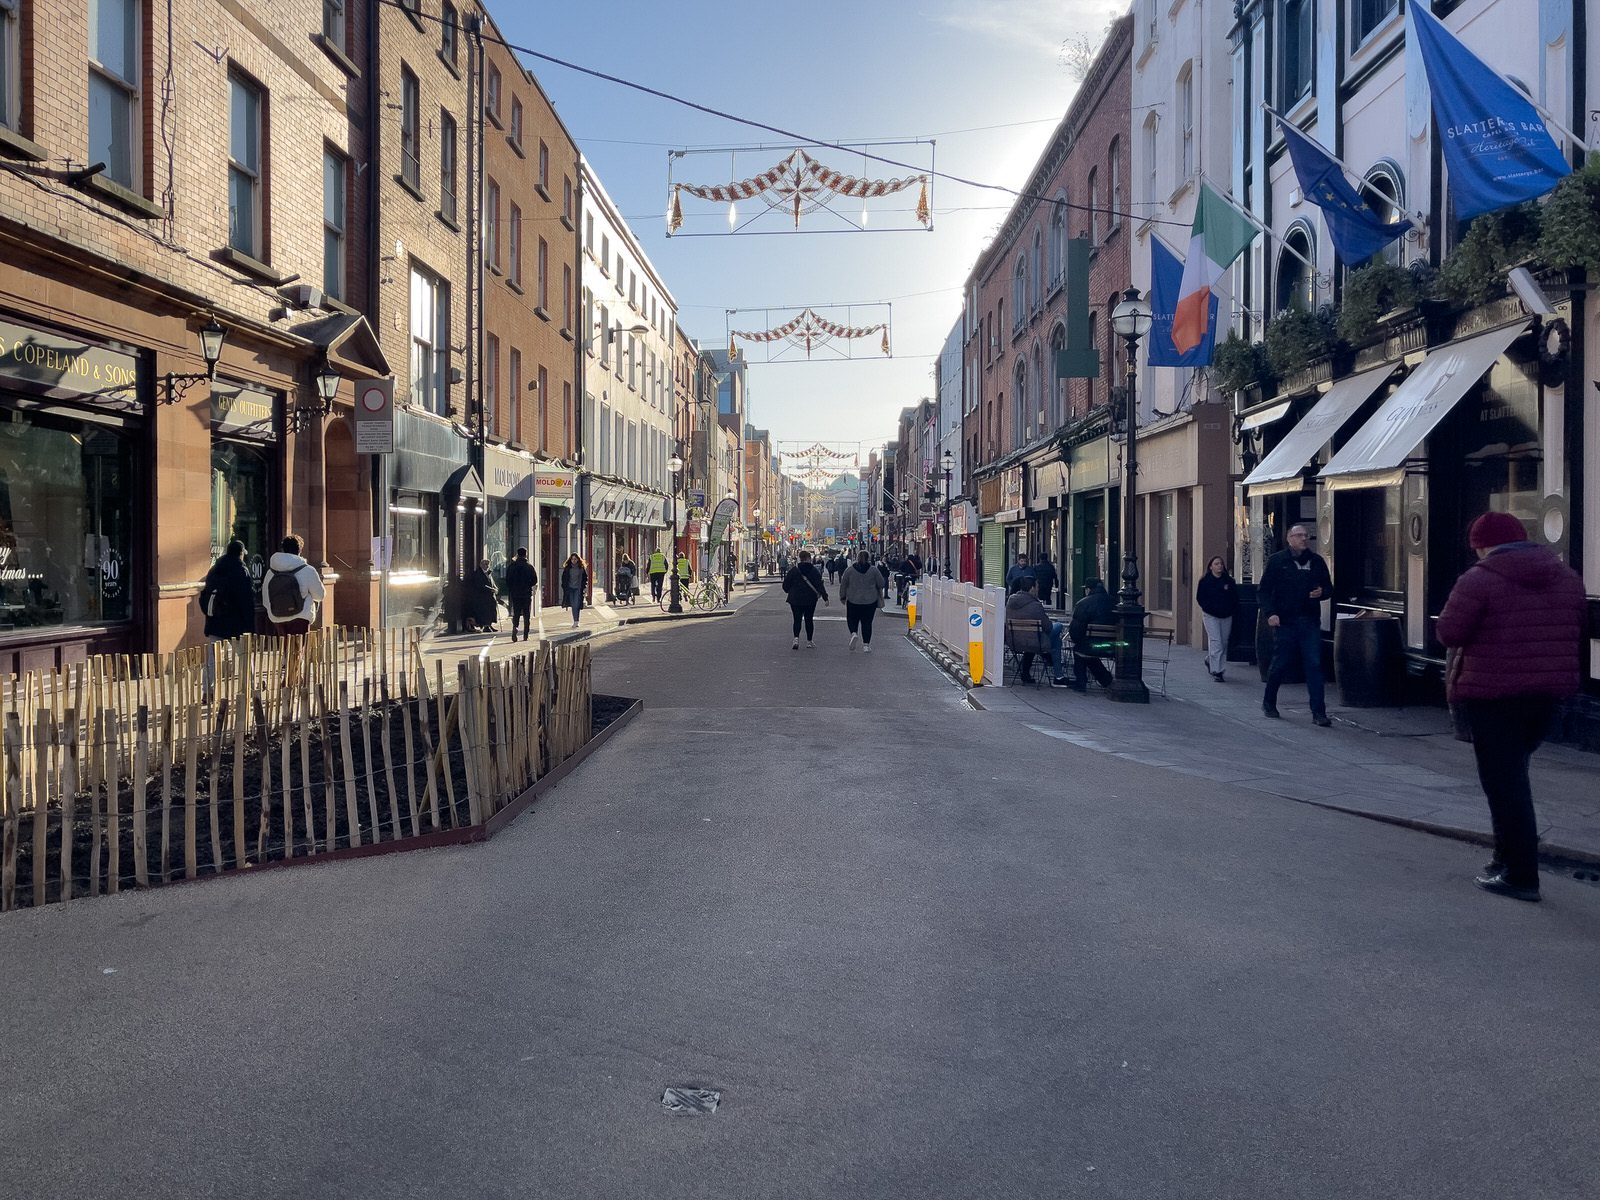 THE NEW STREET FURNITURE AND THE CHRISTMAS TREE [HAVE ARRIVED IN CAPEL STREET]-225862-1